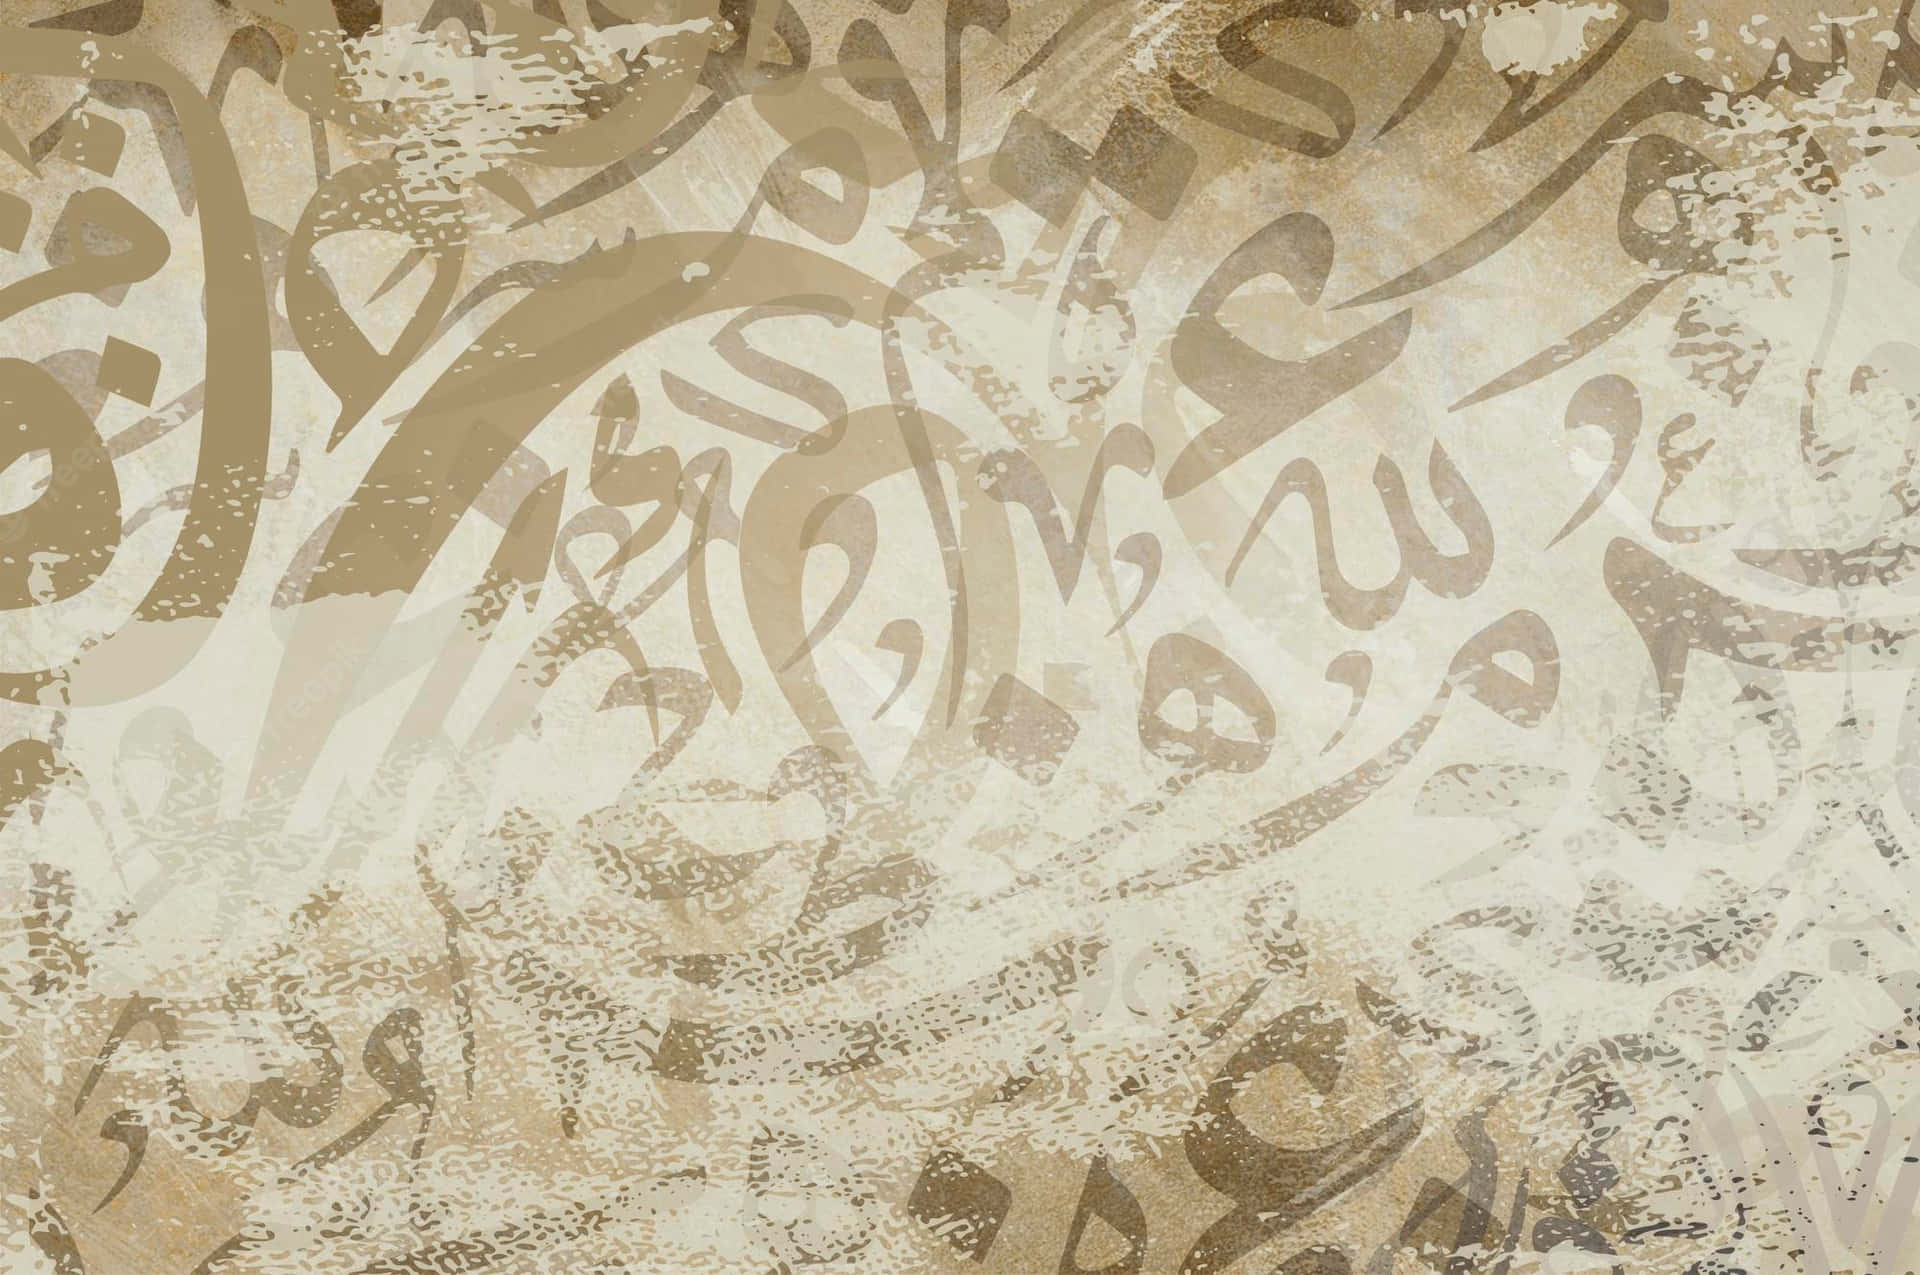 A Tan And Brown Background With Arabic Calligraphy Wallpaper